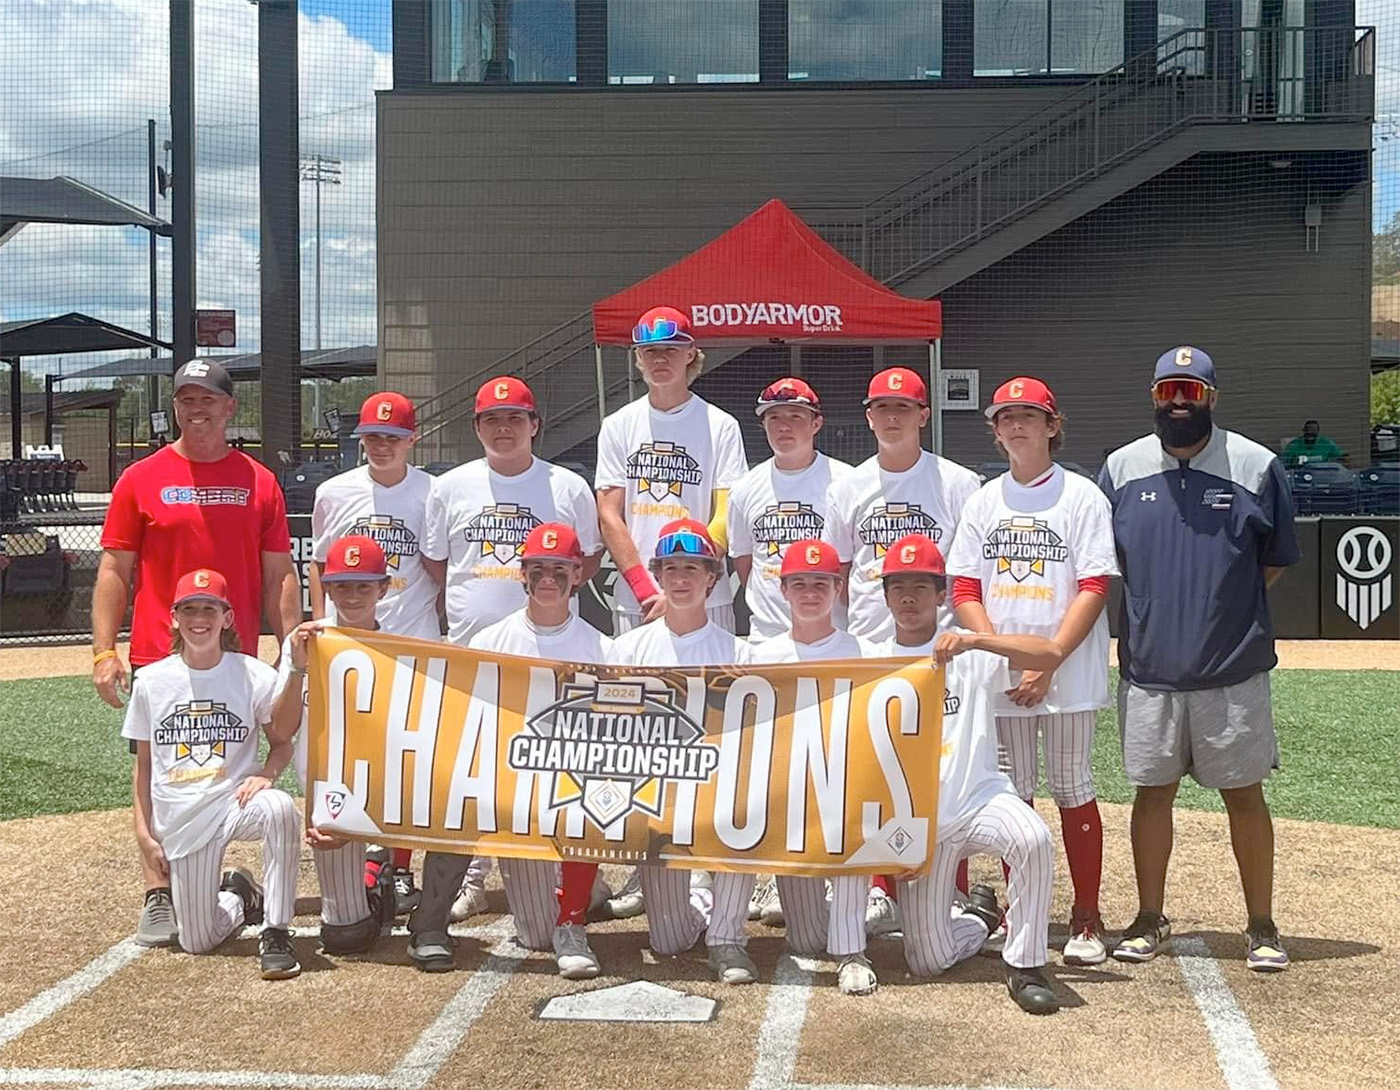 Prep Baseball NATIONAL CHAMPIONS!!! Combat 13U National AI are coming home from Lakepoint, Georgia with some hardware! . Scanzano Combat Baseball in New Jersey.